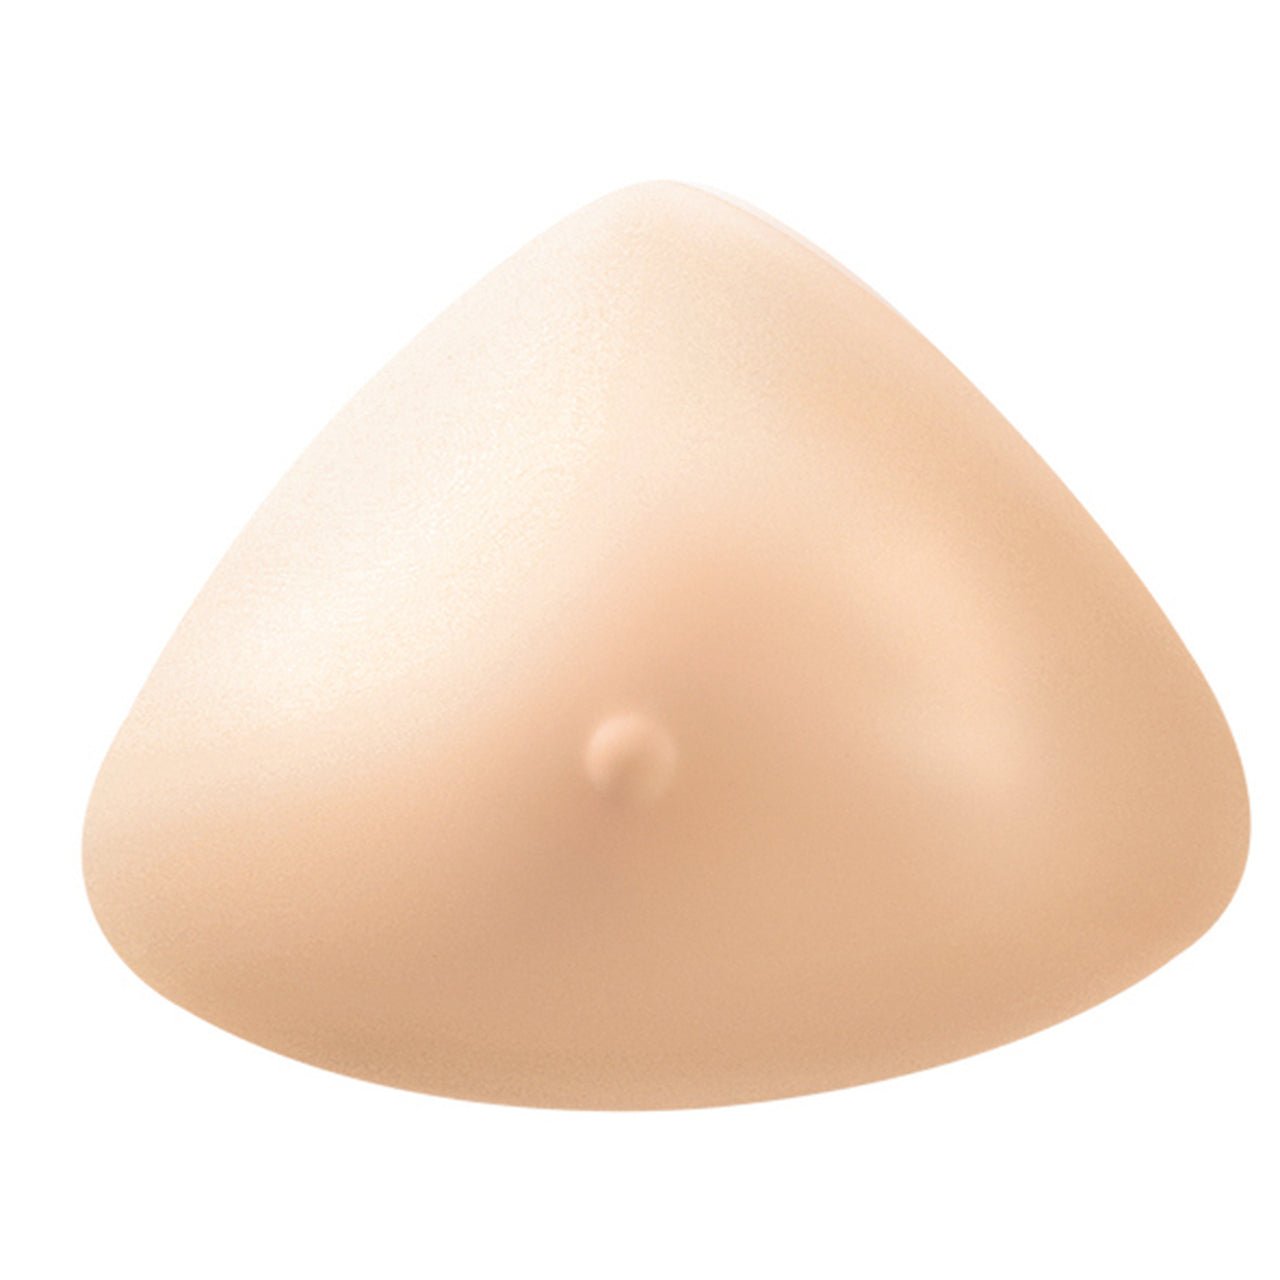 Natura Cosmetic 2S Breast Form-320 - Ivory - Blue Sky Clothing & Lingerie